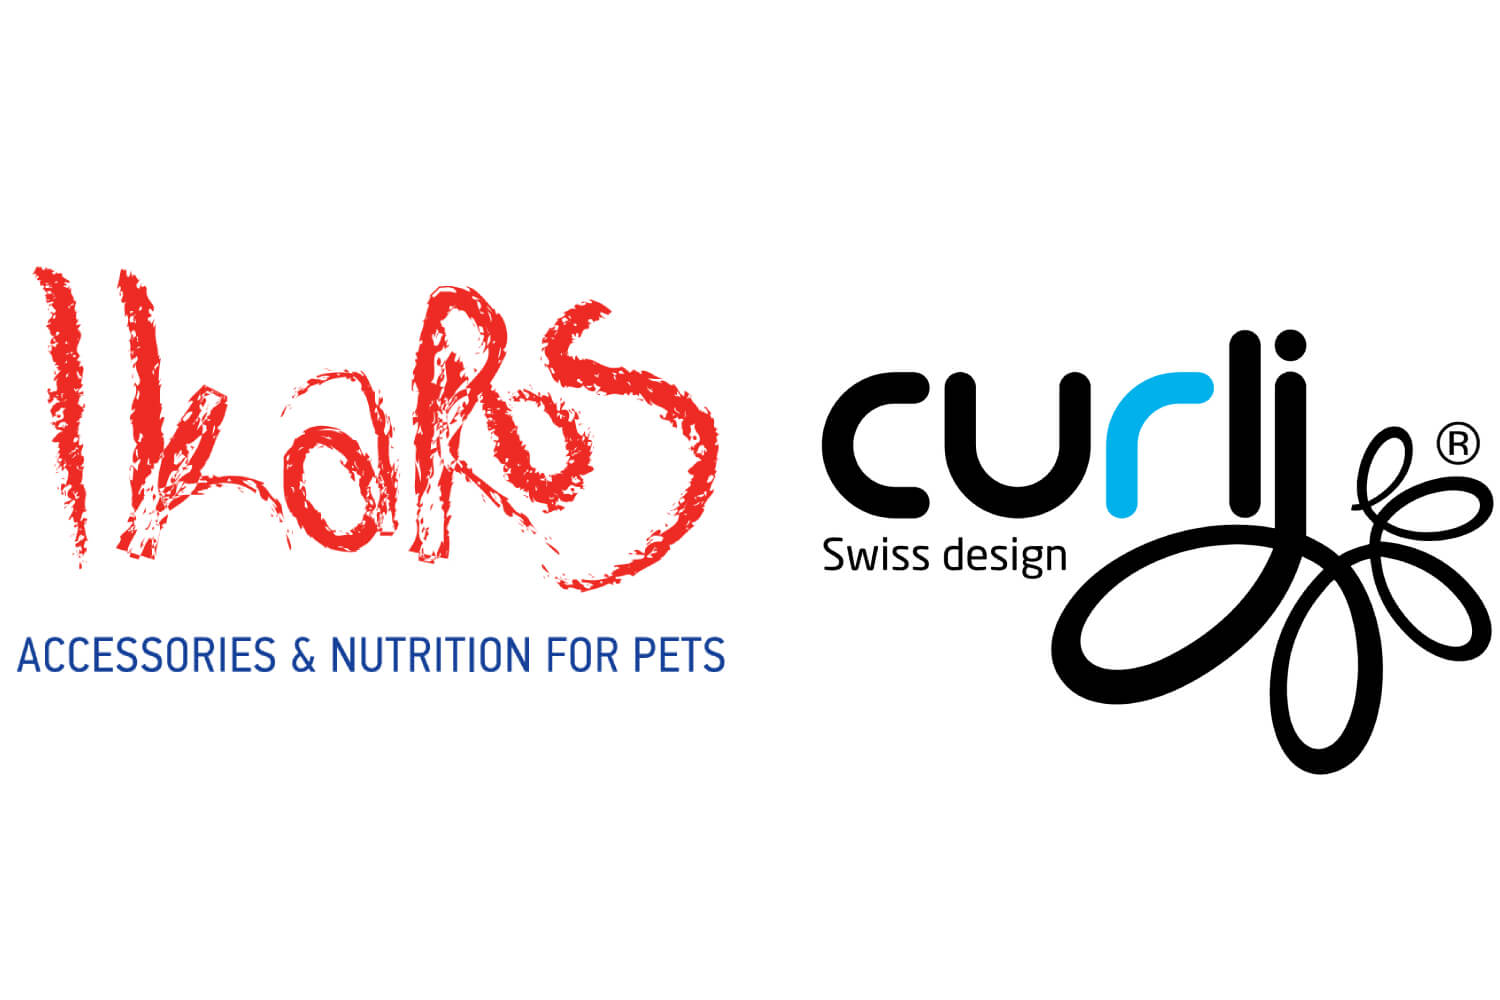 New collaboration between Ikaros Pet Accessories and Curli